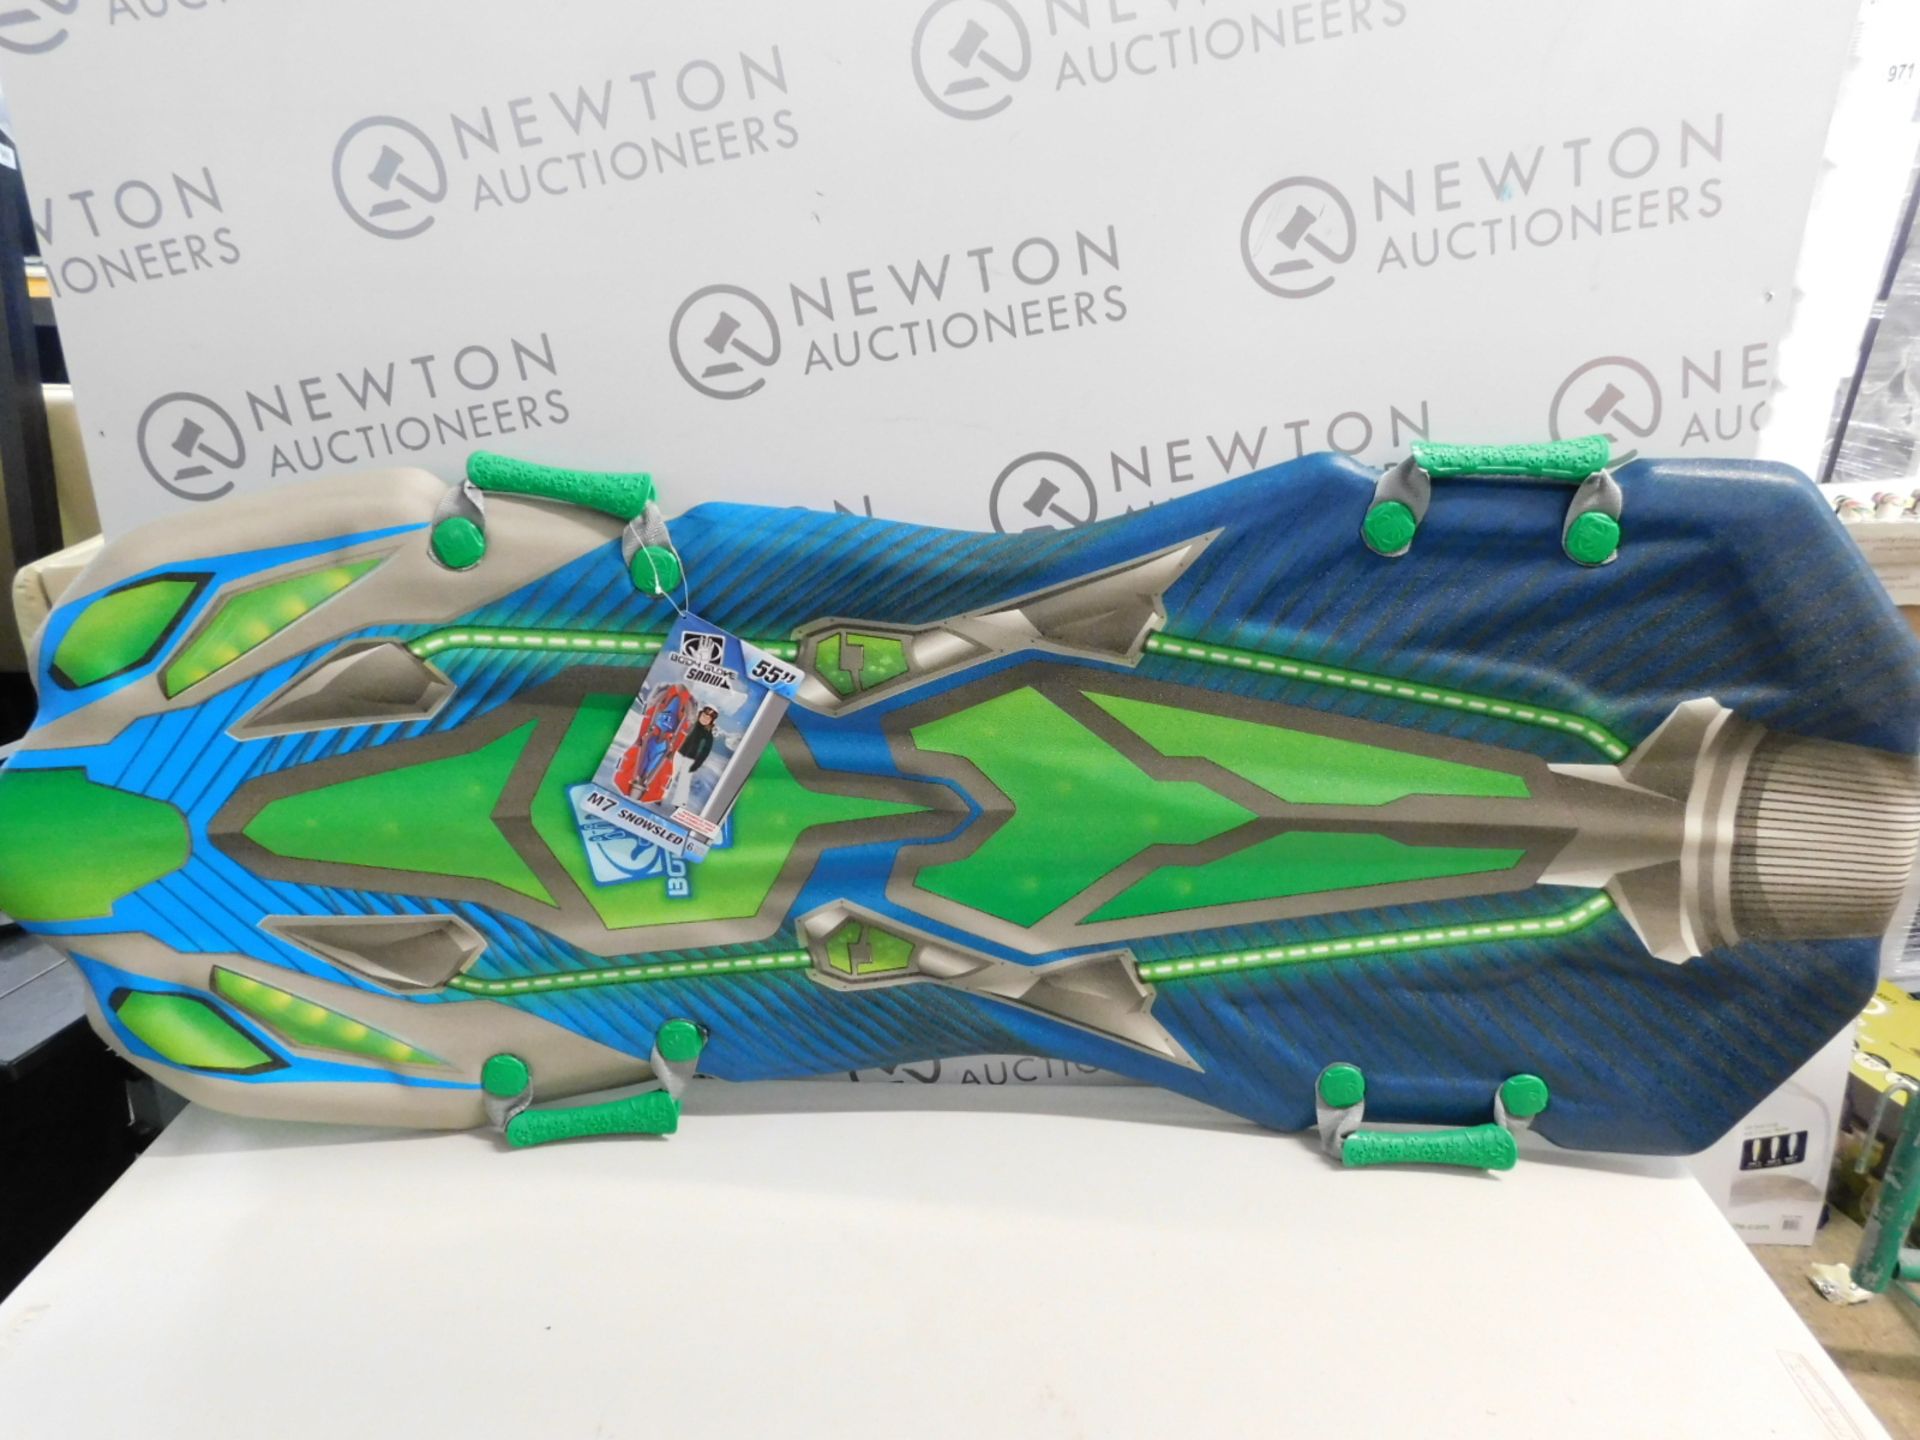 1 BRAND NEW BODY GLOVE M7 55" 2 PERSON SNOW SLED RRP £29.99